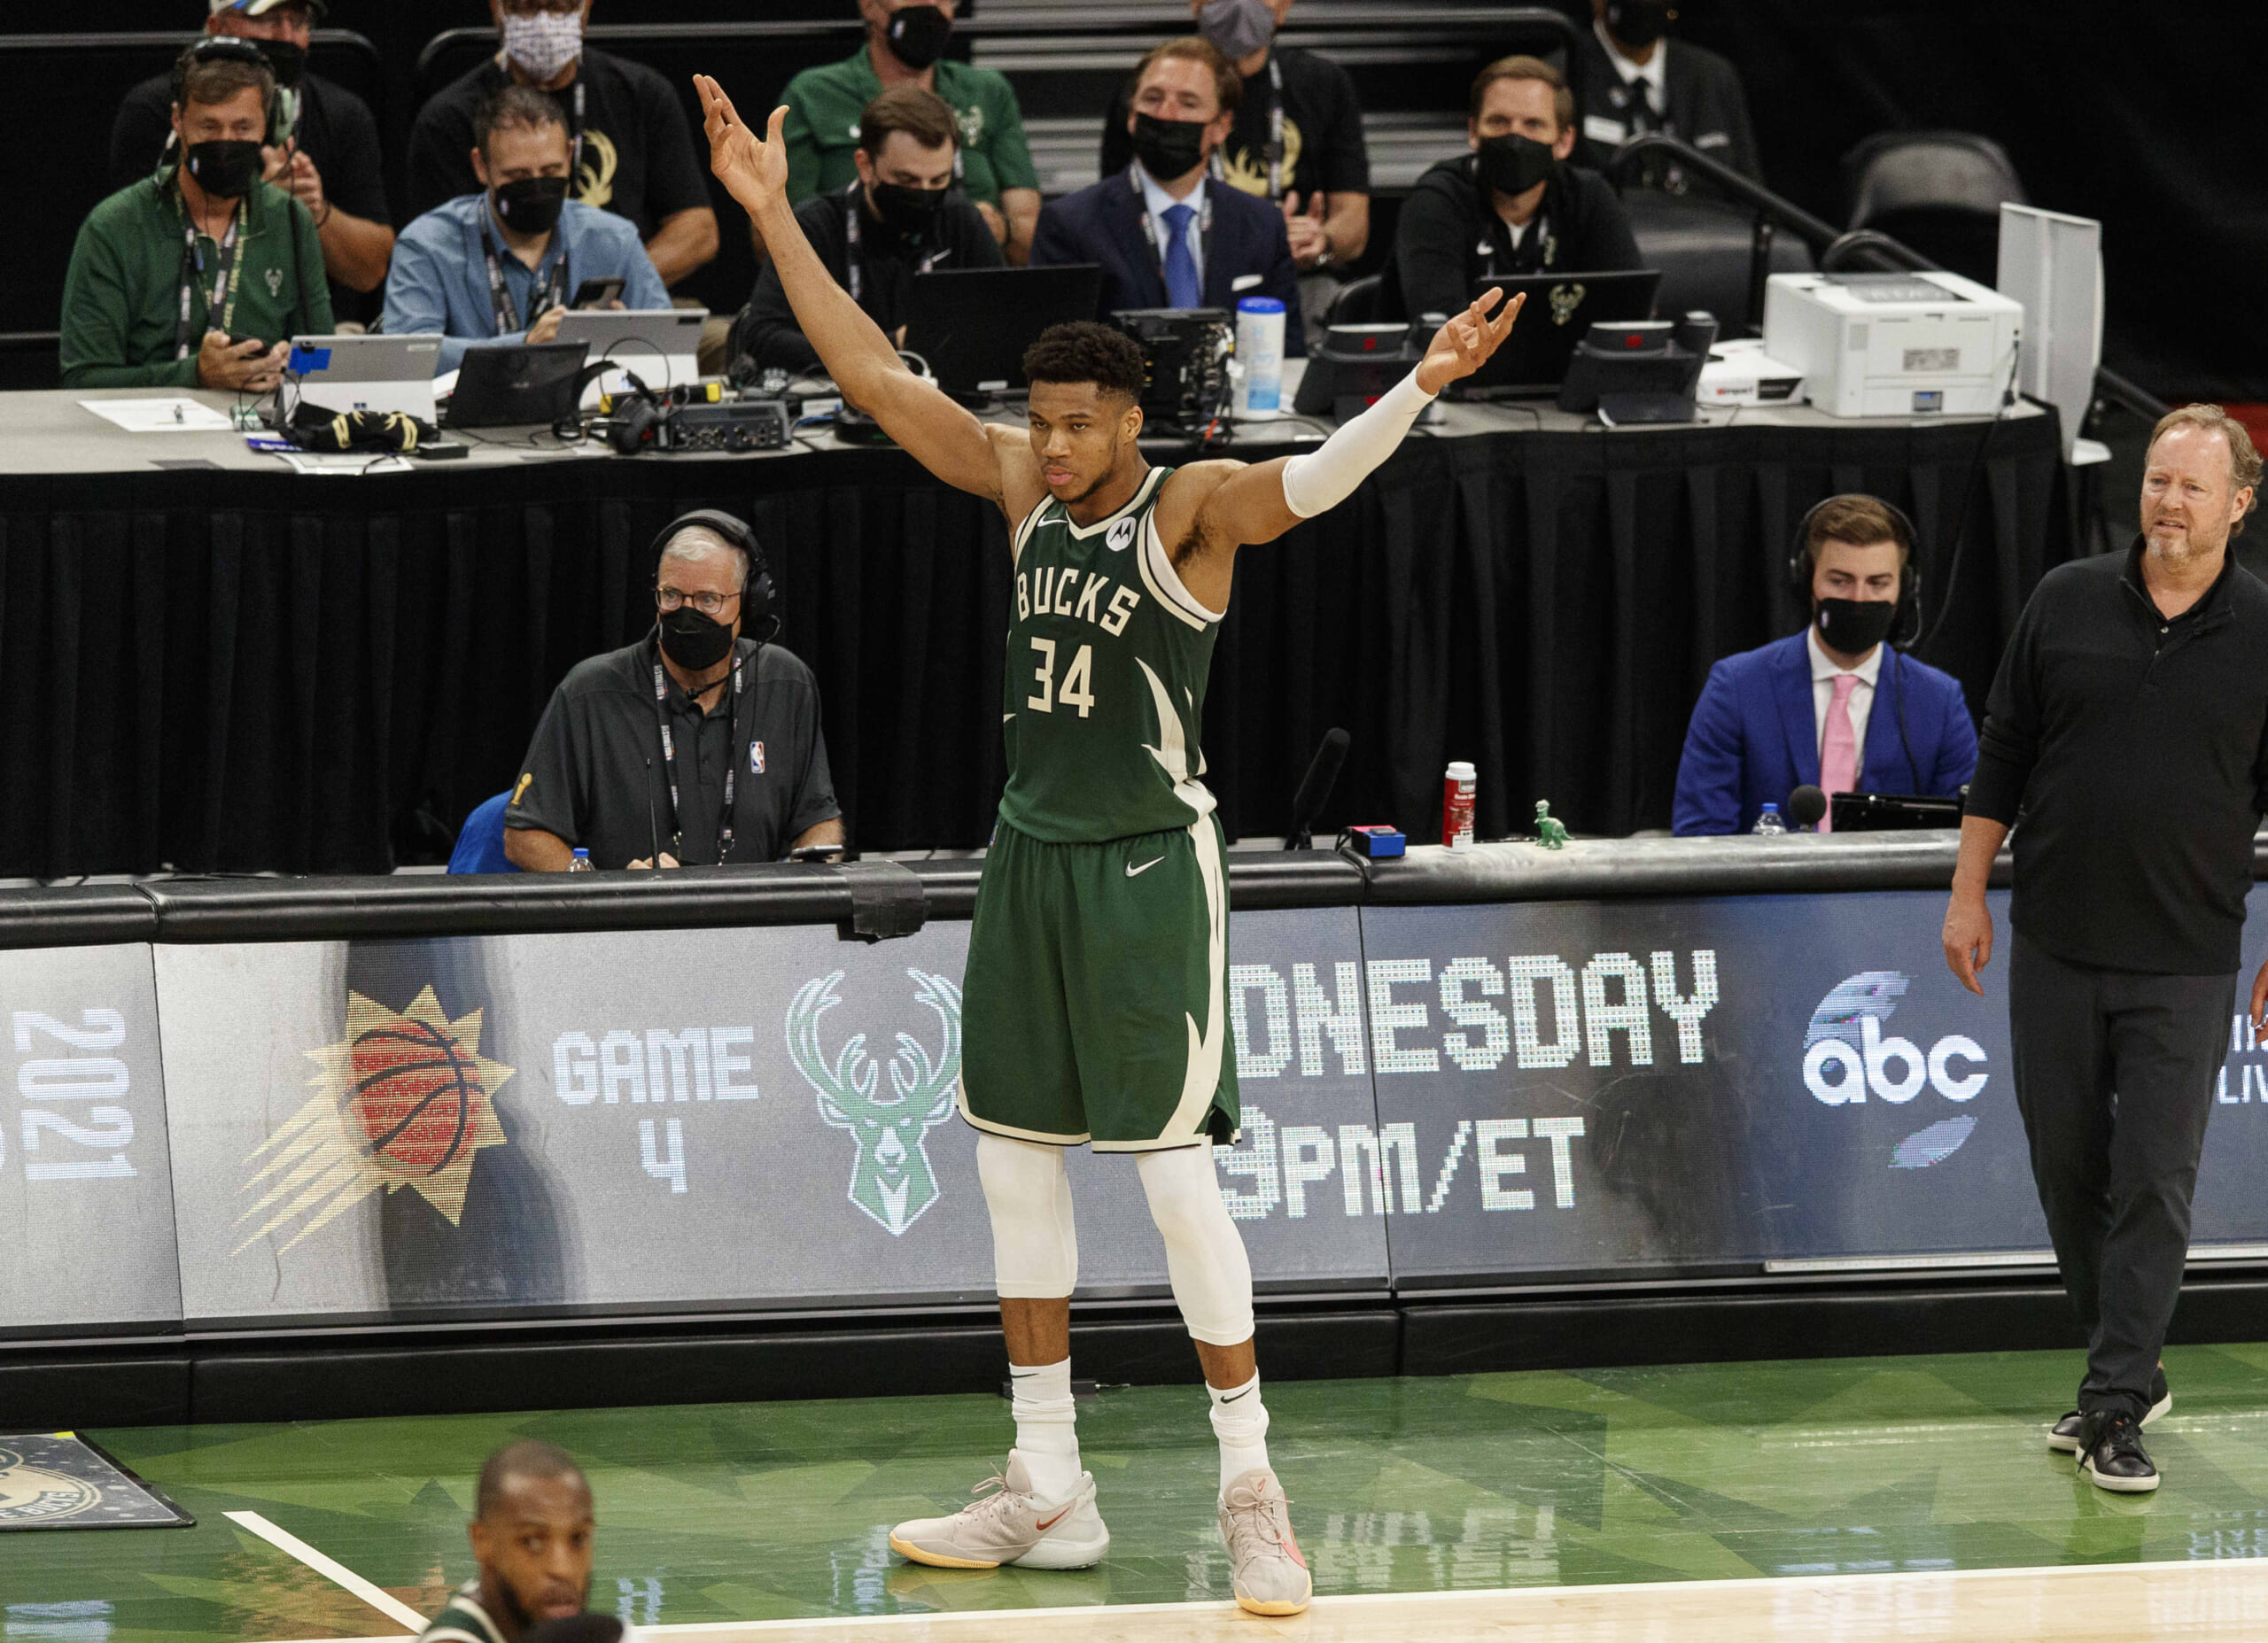 Nba World Reacts To Historical Performance From Giannis Antetokounmpo In Game 3 Of The Finals